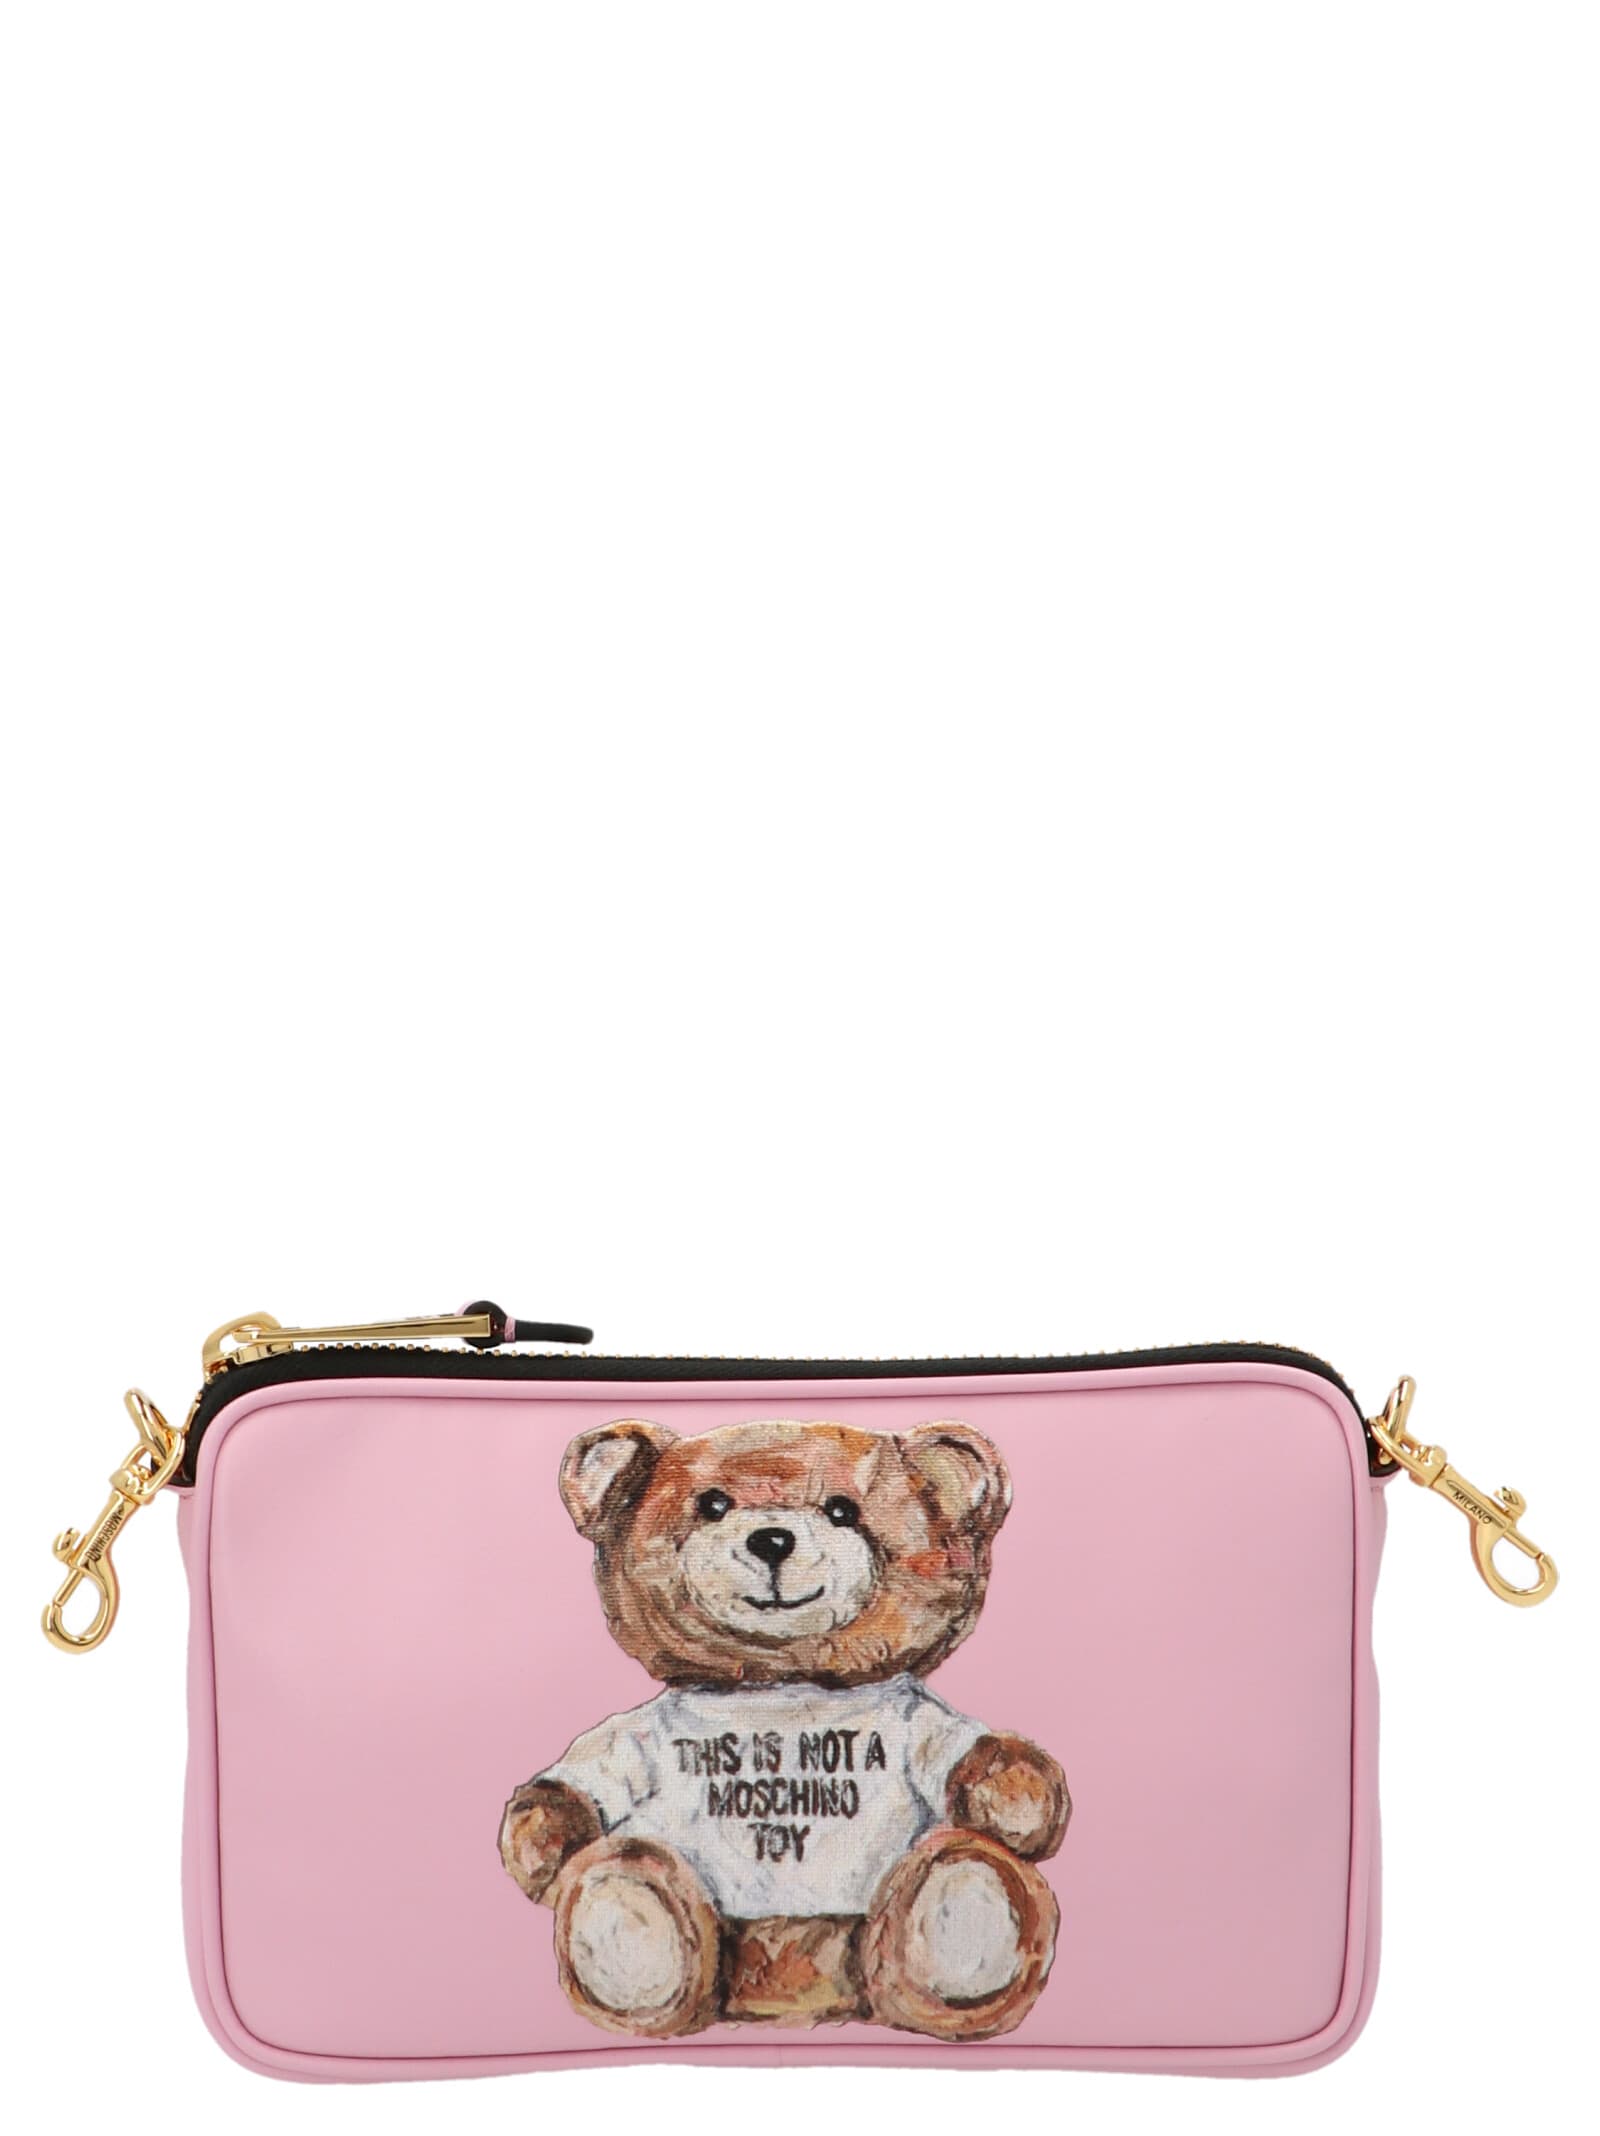 Moschino Teddy Bag In Pink | ModeSens